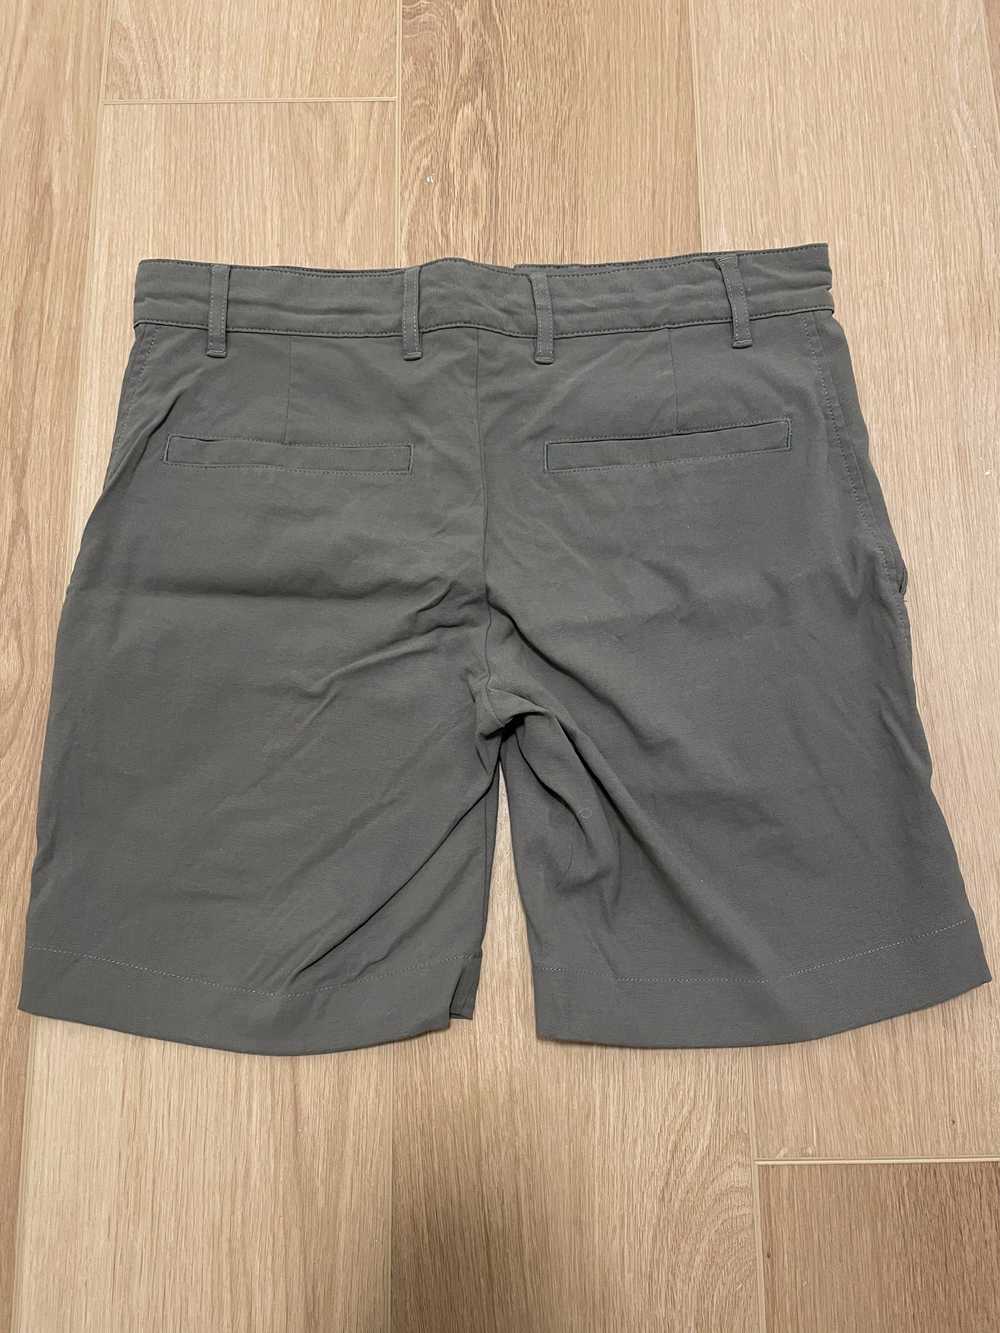 Outlier - New Way Shorts - image 3